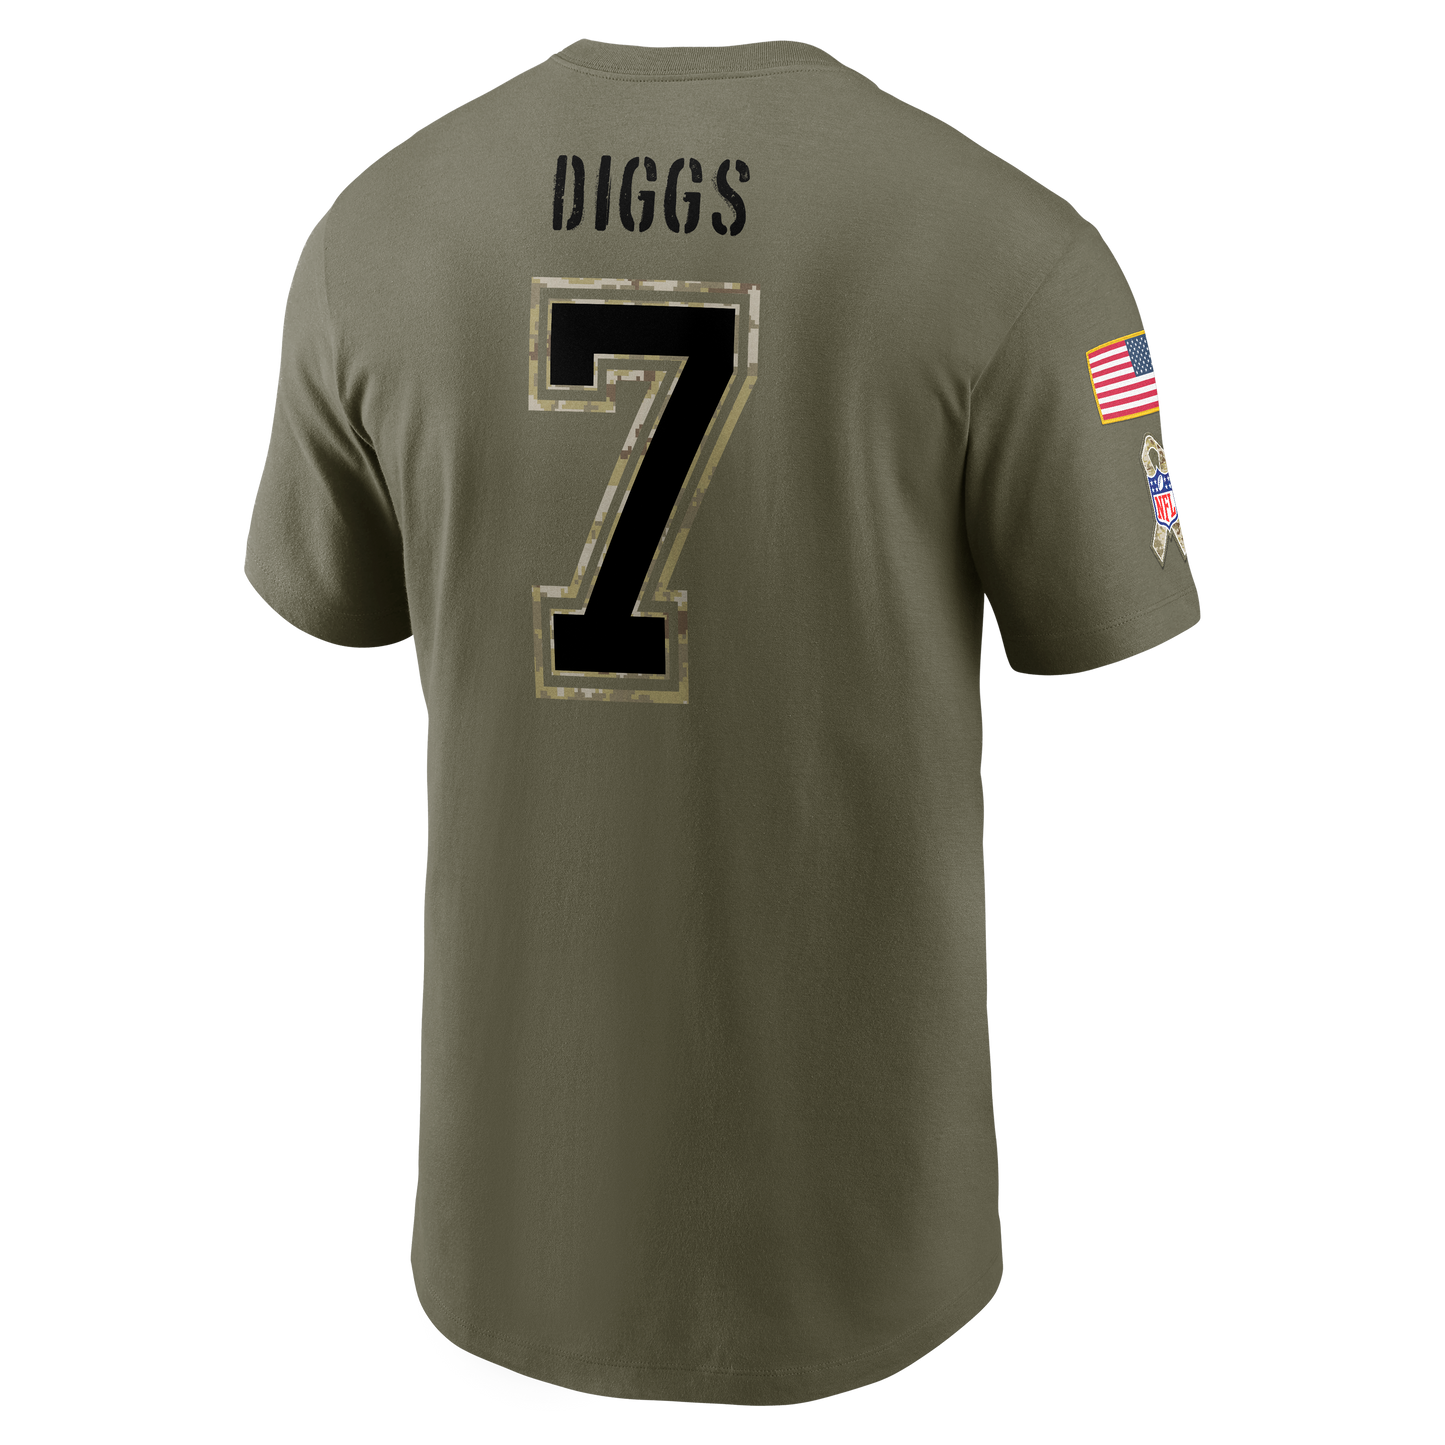 Dallas Cowboys Nike Salute to Service # 7 Trevon Diggs Player T-Shirt- Olive